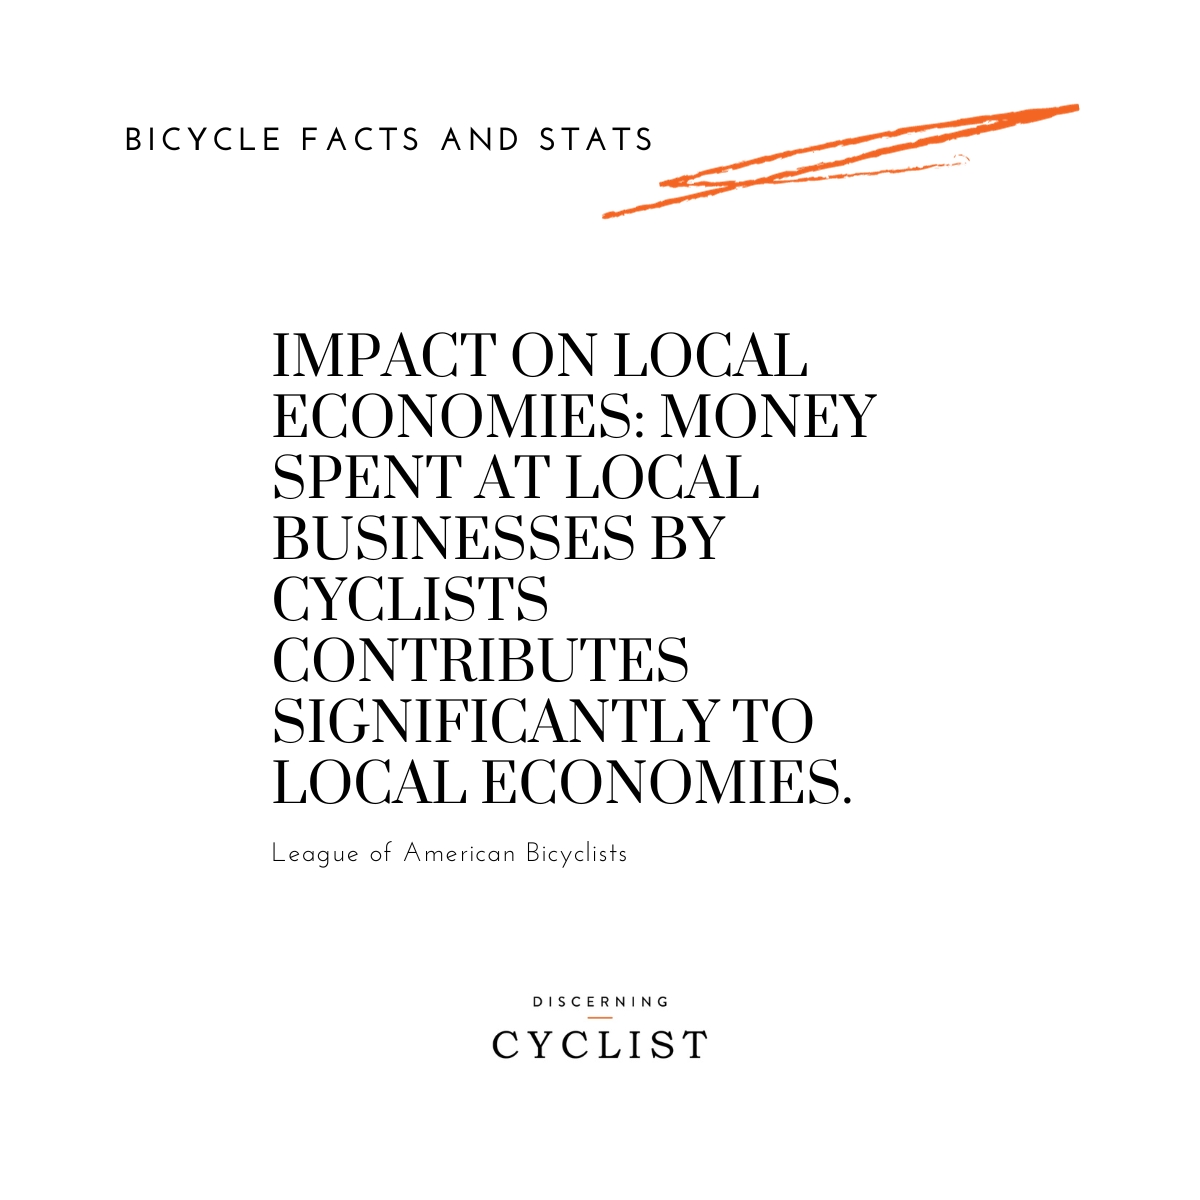 Impact on Local Economies: Money spent at local businesses by cyclists contributes significantly to local economies.